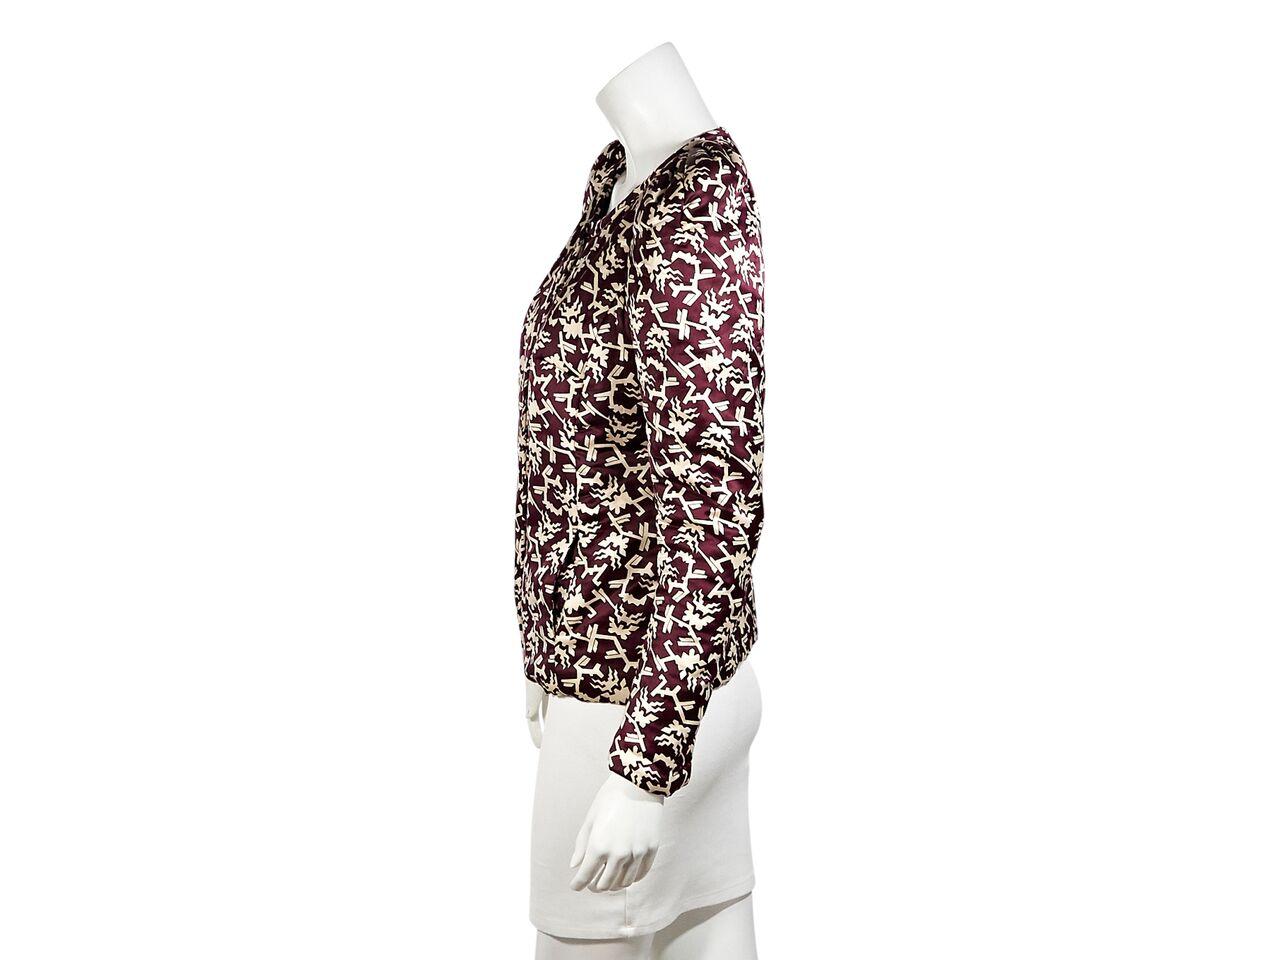 Product details:  Burgundy and cream printed cotton/silk jacket by Isabel Marant.  Roundneck.  Long sleeves.  Concealed hook and eye closure.  Waist slide pockets.  30